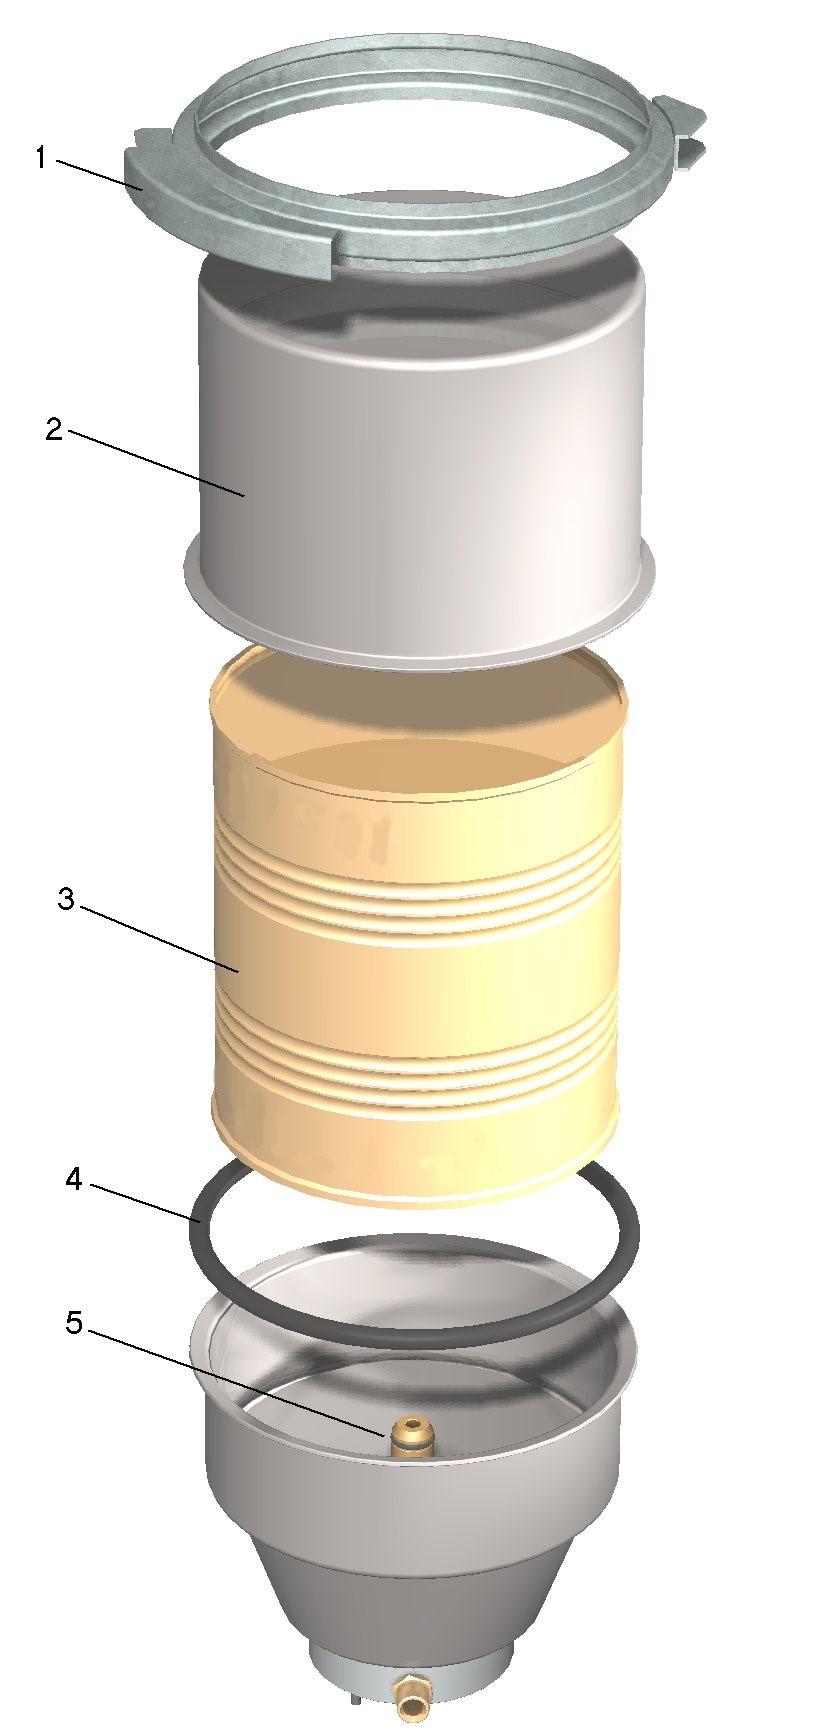 Pull up the used filter insert (3). The filter is sealed by a O-ring (5). Let the oil drain from the filter centre tube. The filter can now be removed without oil spill. 4.